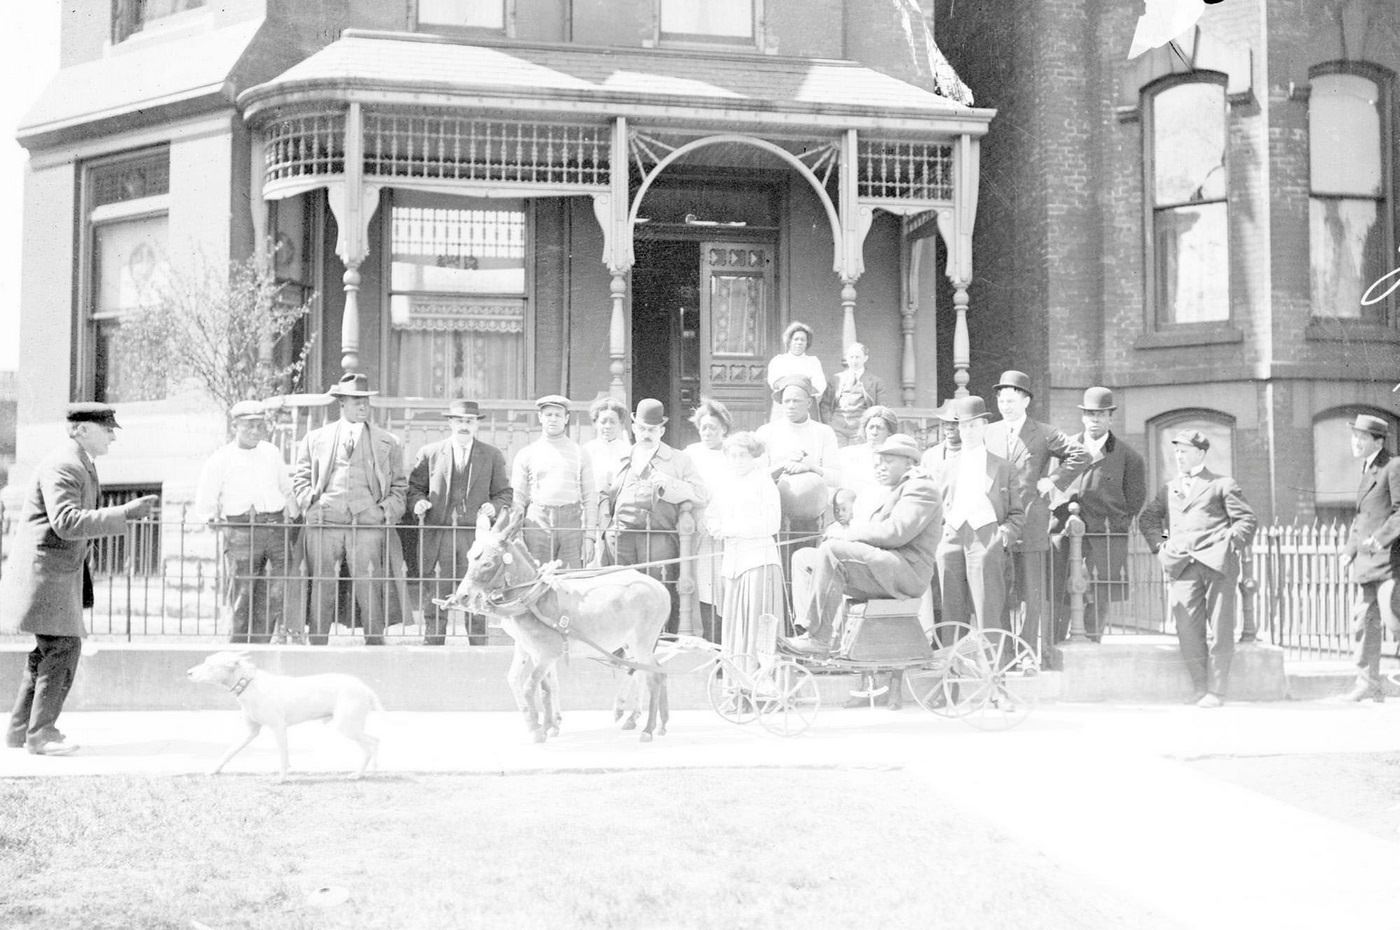 Boxer Jack Johnson driving a small wagon pulled by two small donkeys on the sidewalk in front of a house in Chicago, 1910.